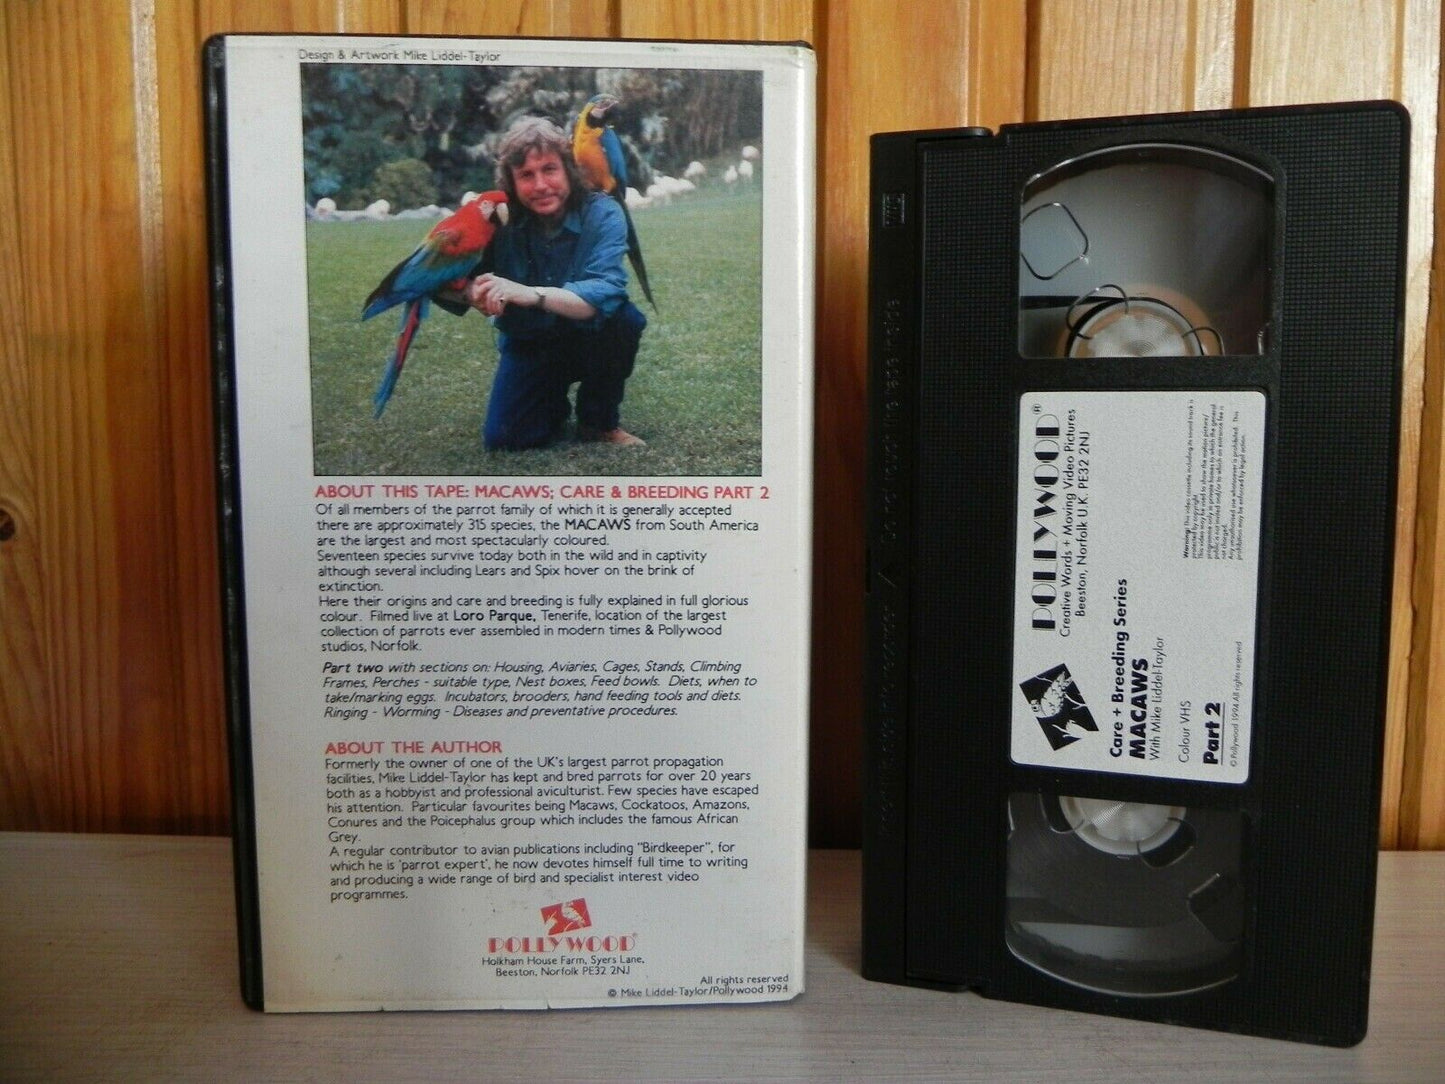 Macaws - Part 2 - Care And Breeding Series - Mike Liddler-Taylor - Pal VHS-